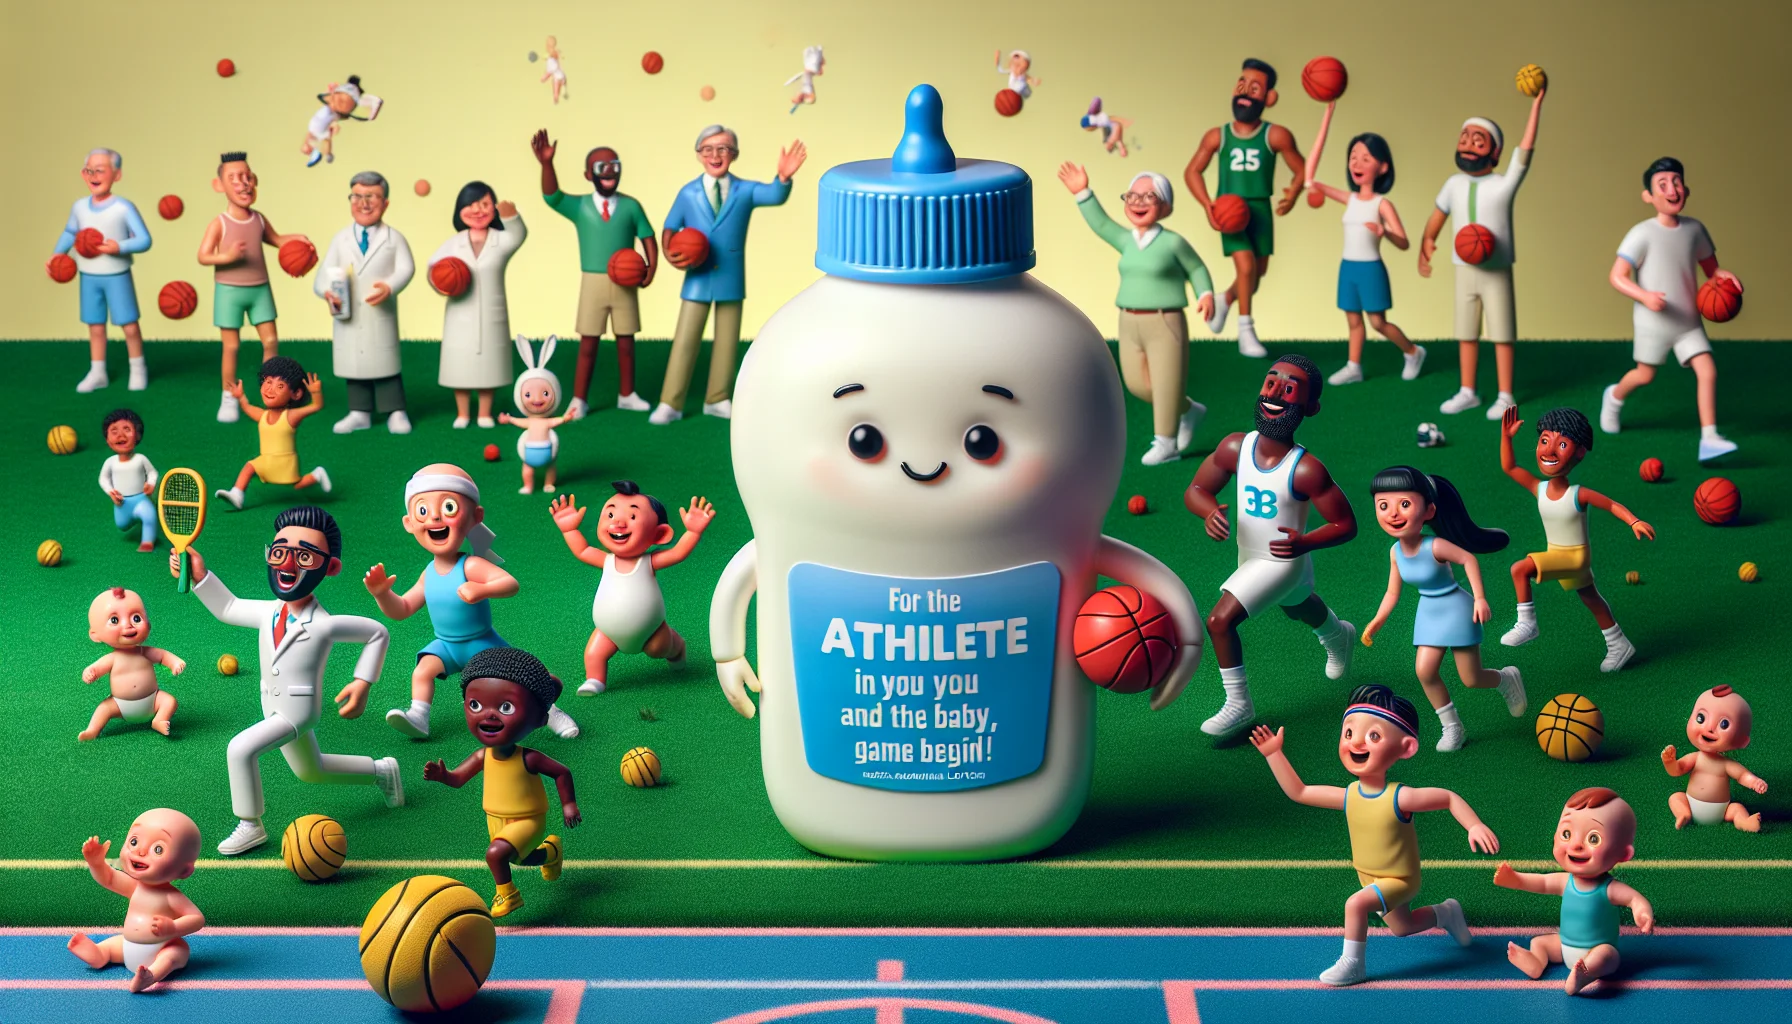 An amusing image where a cute, anthropomorphic bottle of magnesium lotion for babies, with a big smiling face, is displayed. The bottle is wearing a miniature athlete's uniform and holding a tiny basketball. On a grassy field, multiple ethnically diverse, male and female adult athletes are depicted in sports attire, actively engaged in various sports activities such as running, basketball, and tennis. They look surprised and delighted, reaching out for the lotion. The slogan next to the lotion says, 'For the athlete in you and your baby, let the game begin!'